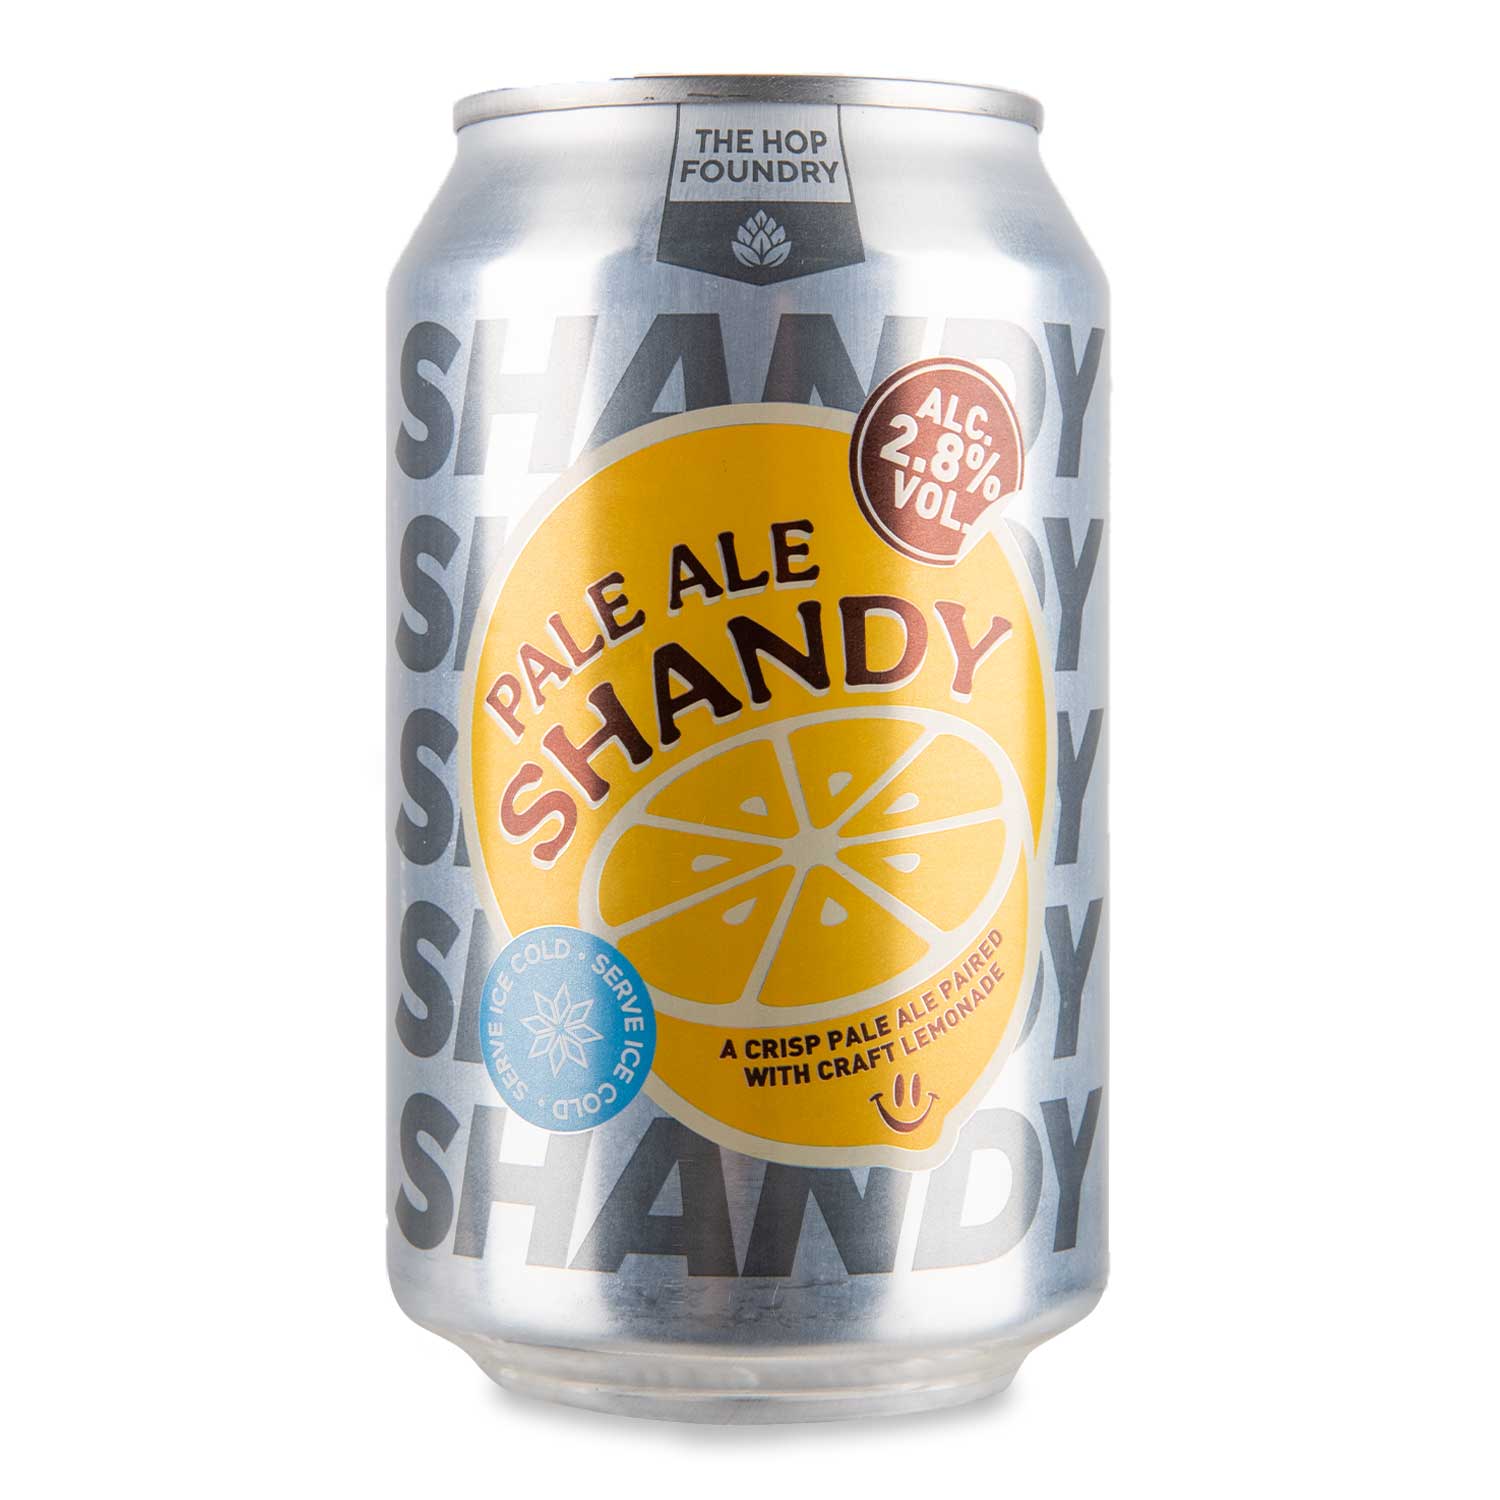 The Hop Foundry Pale Ale Shandy 330ml